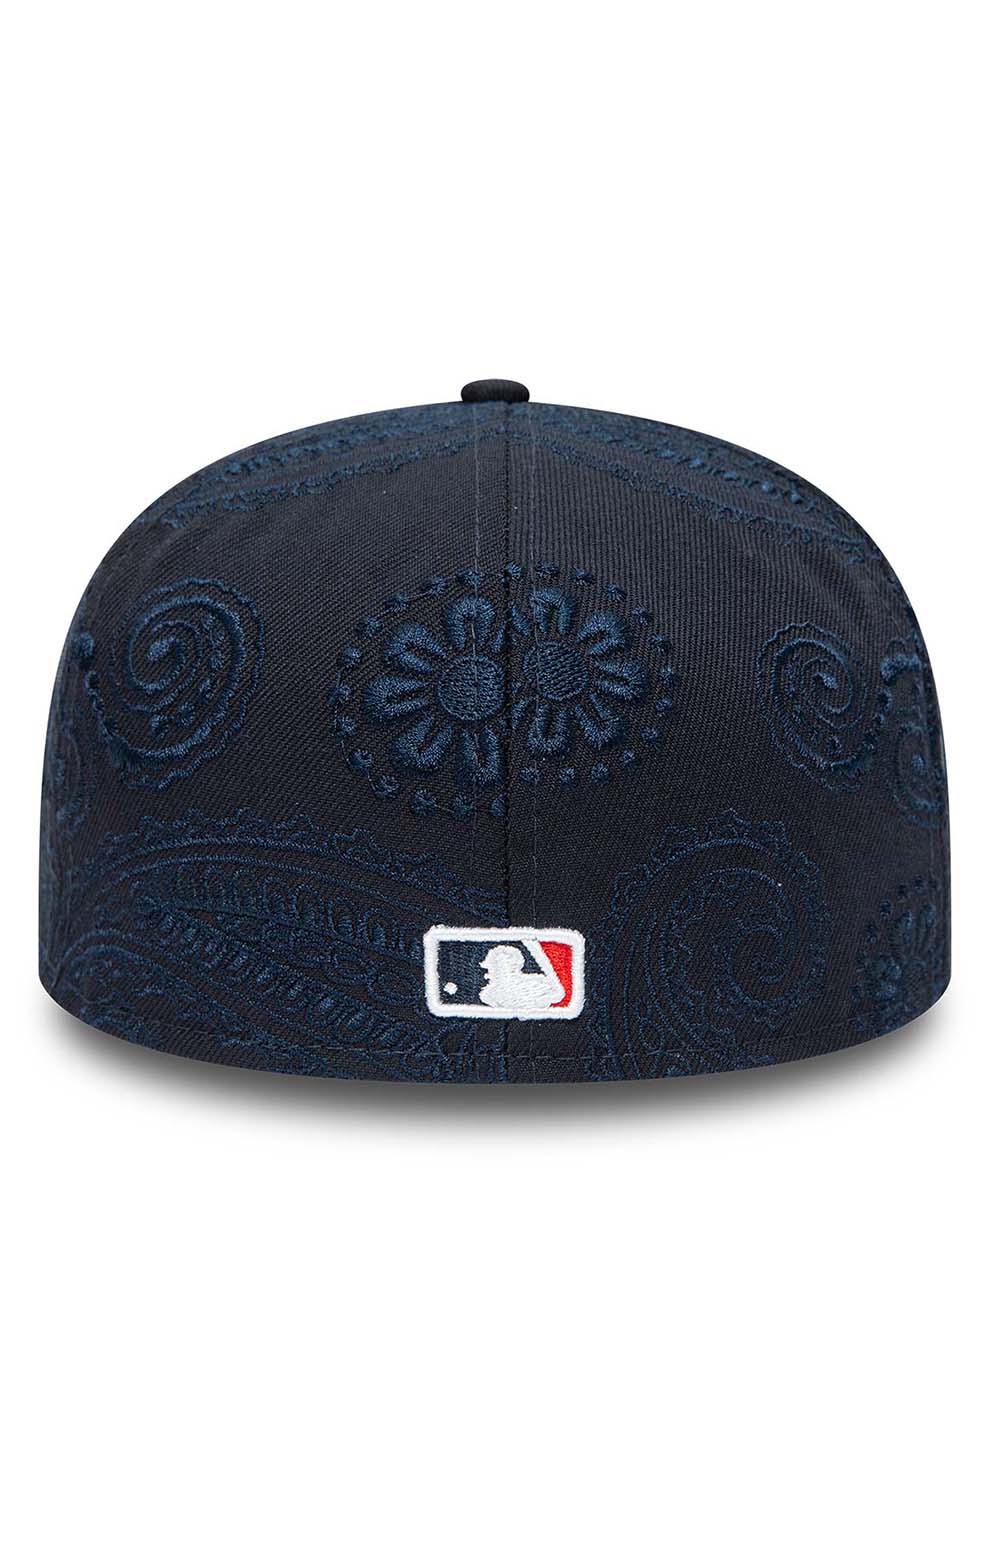 Atlanta Braves Swirl 59FIFTY Fitted Hat